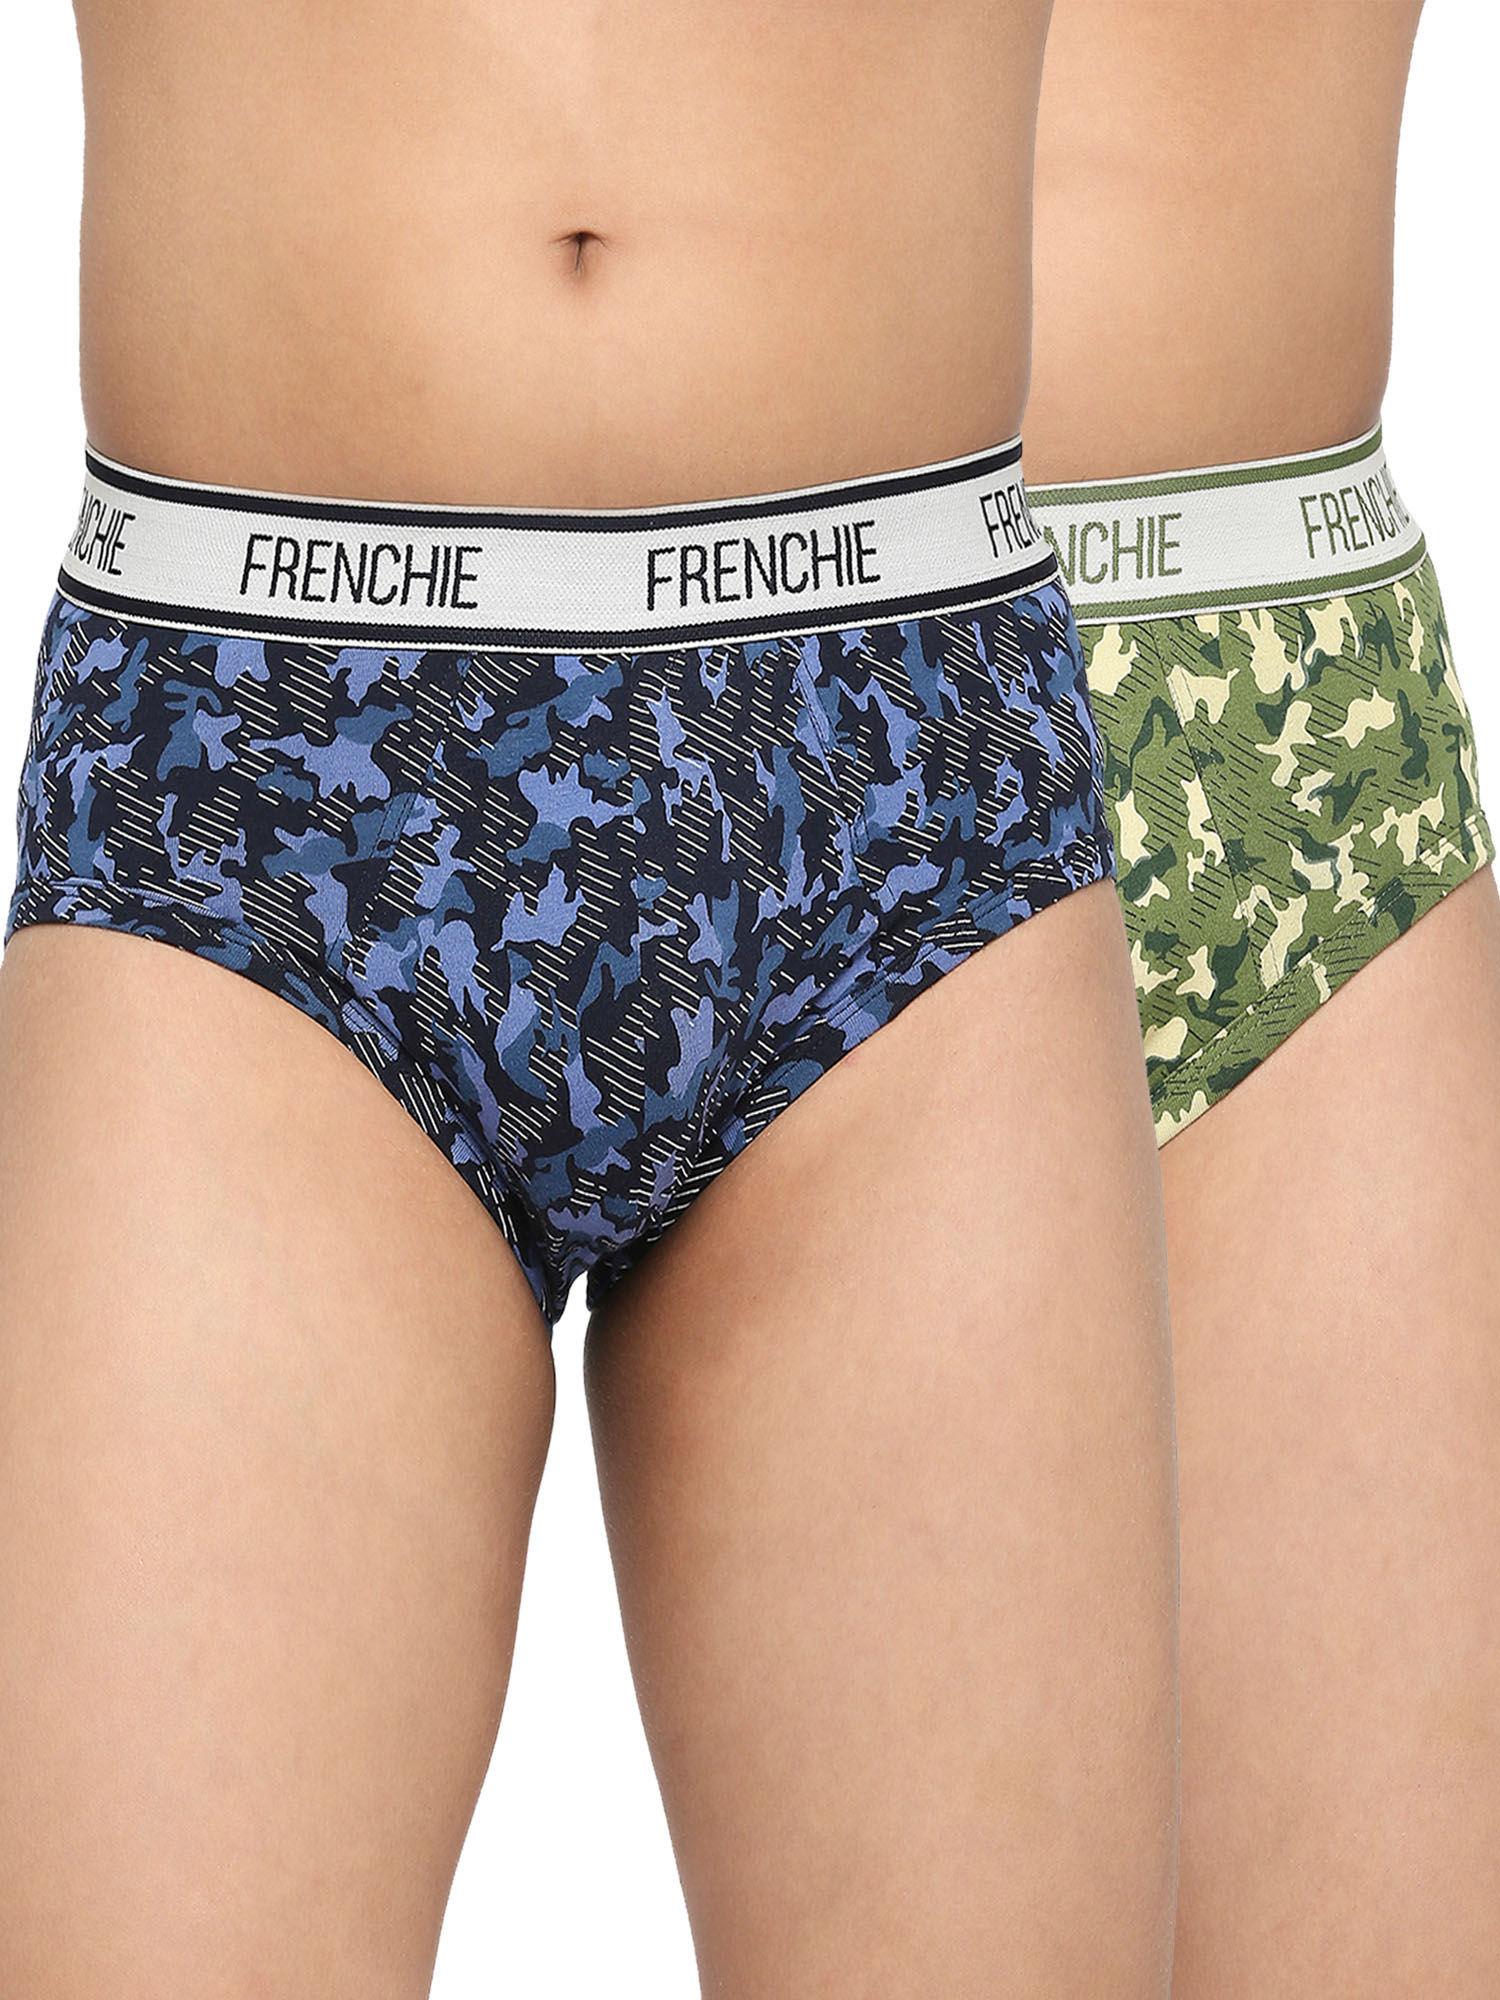 teenagers-cotton-brief-navy-blue-and-green-(pack-of-2)